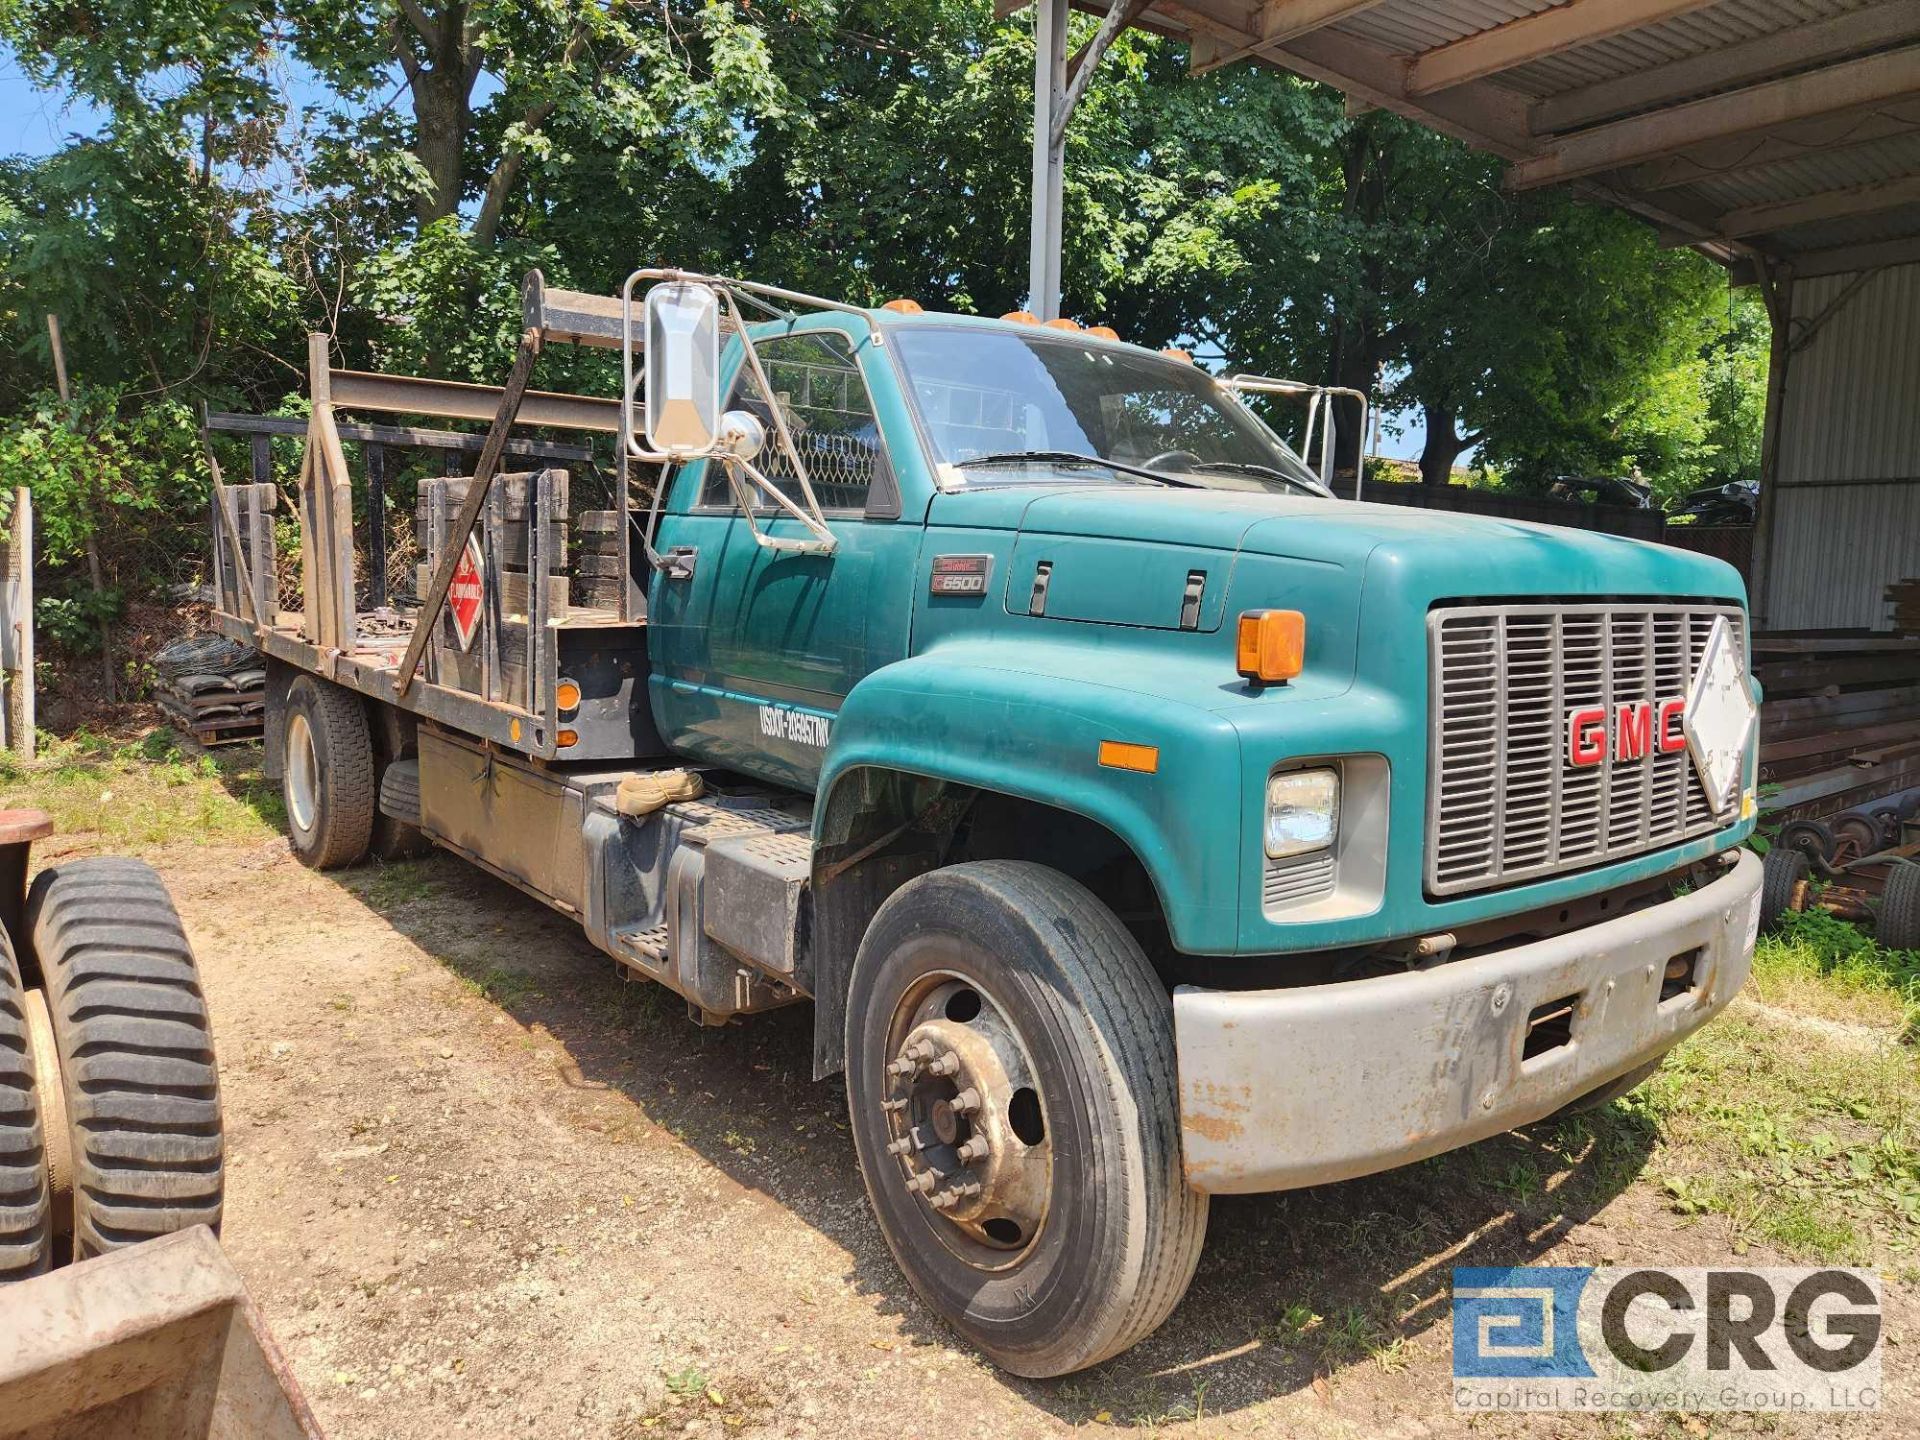 GMC Stake Body Flatbed Dump Truck - Image 9 of 14